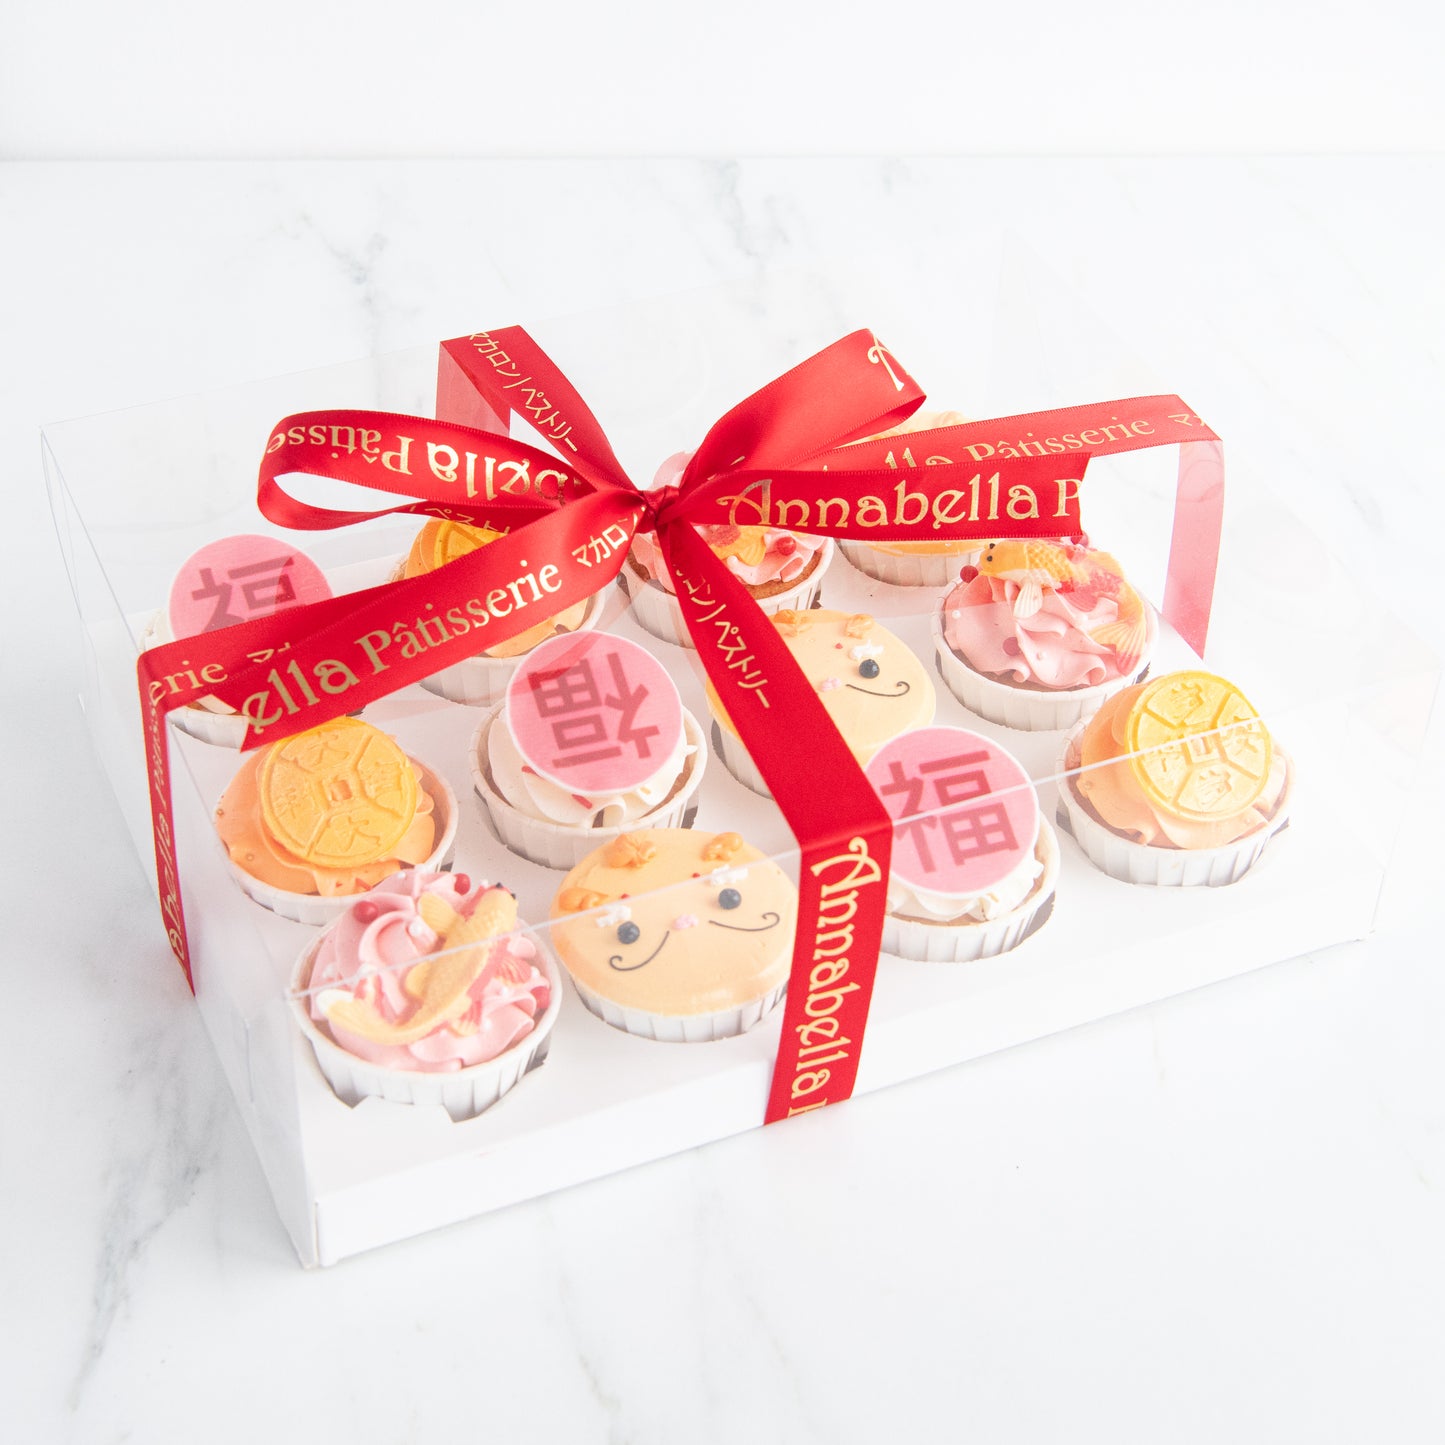 Year Of The Dragon! | Lunar Cupcakes 12 pcs in Gift Box | $68.80 Nett